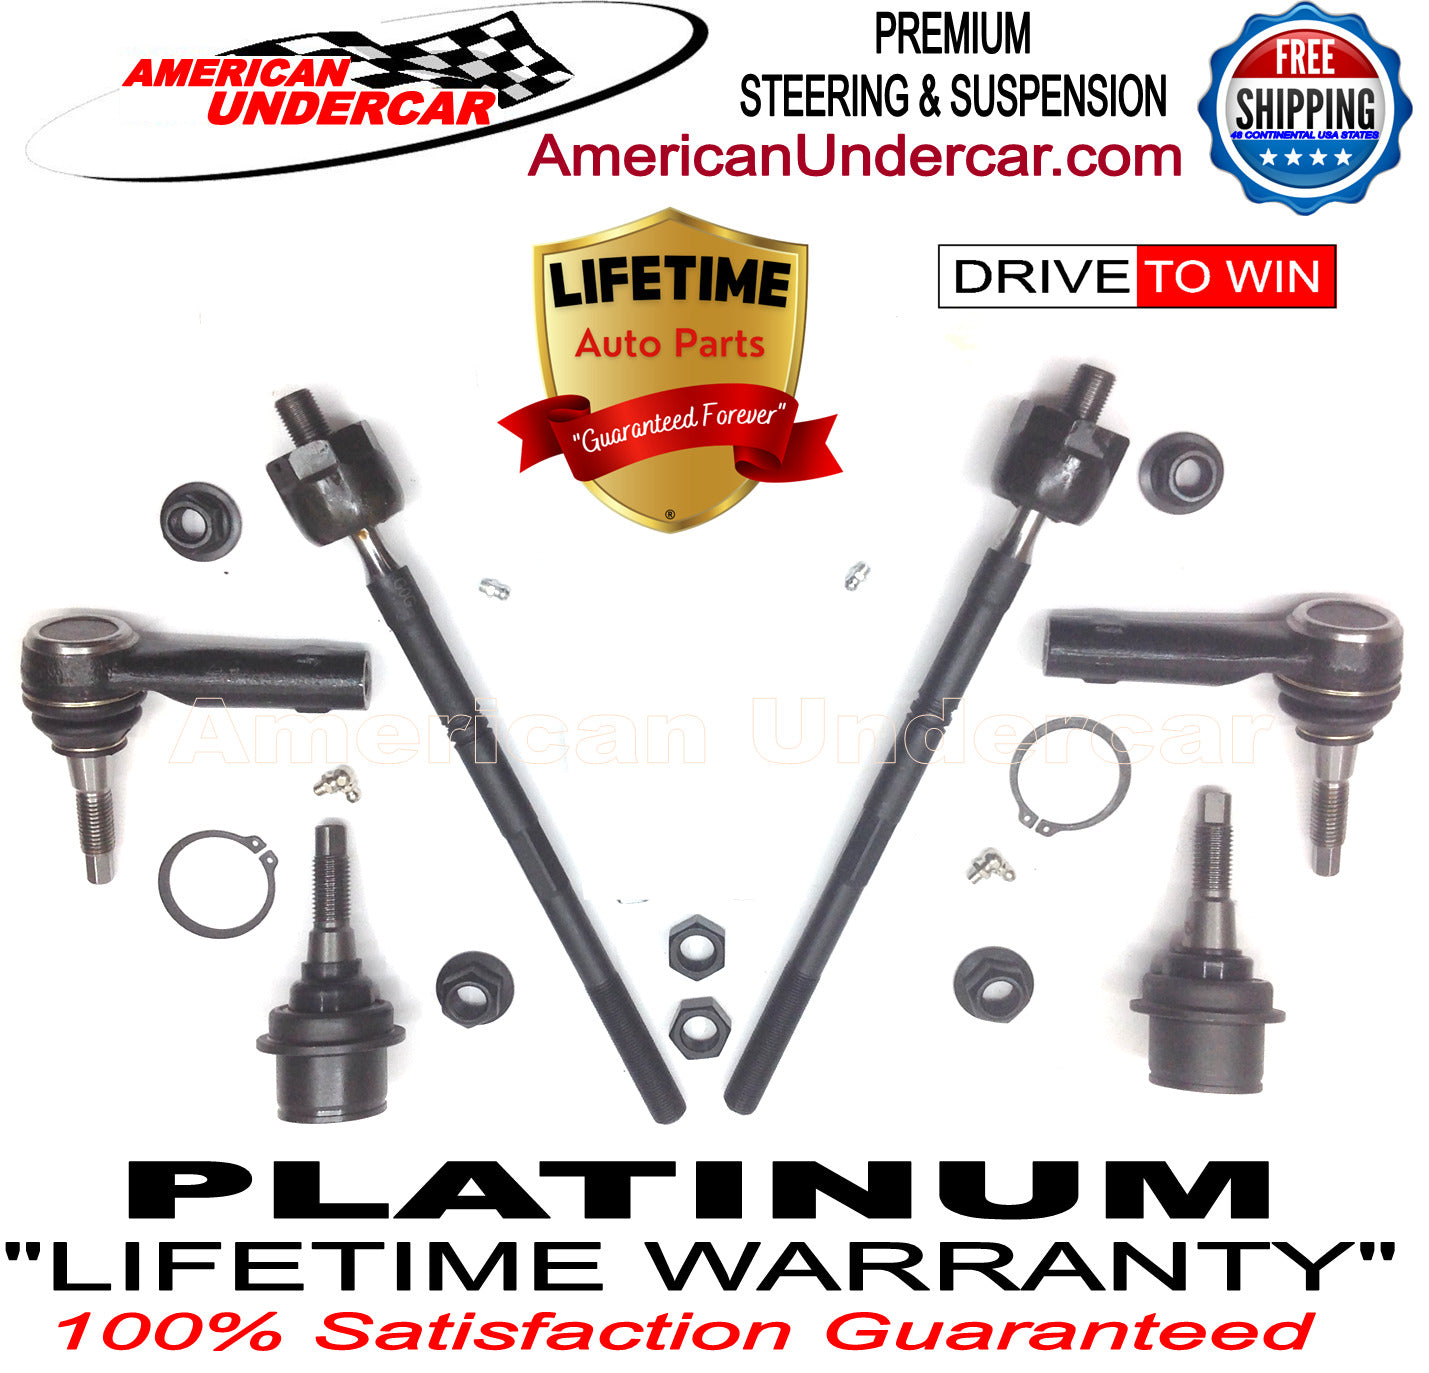 Lifetime Lower Ball Joints Tie Rod Steering Kit for 2007-2017 Ford Expedition 4x4